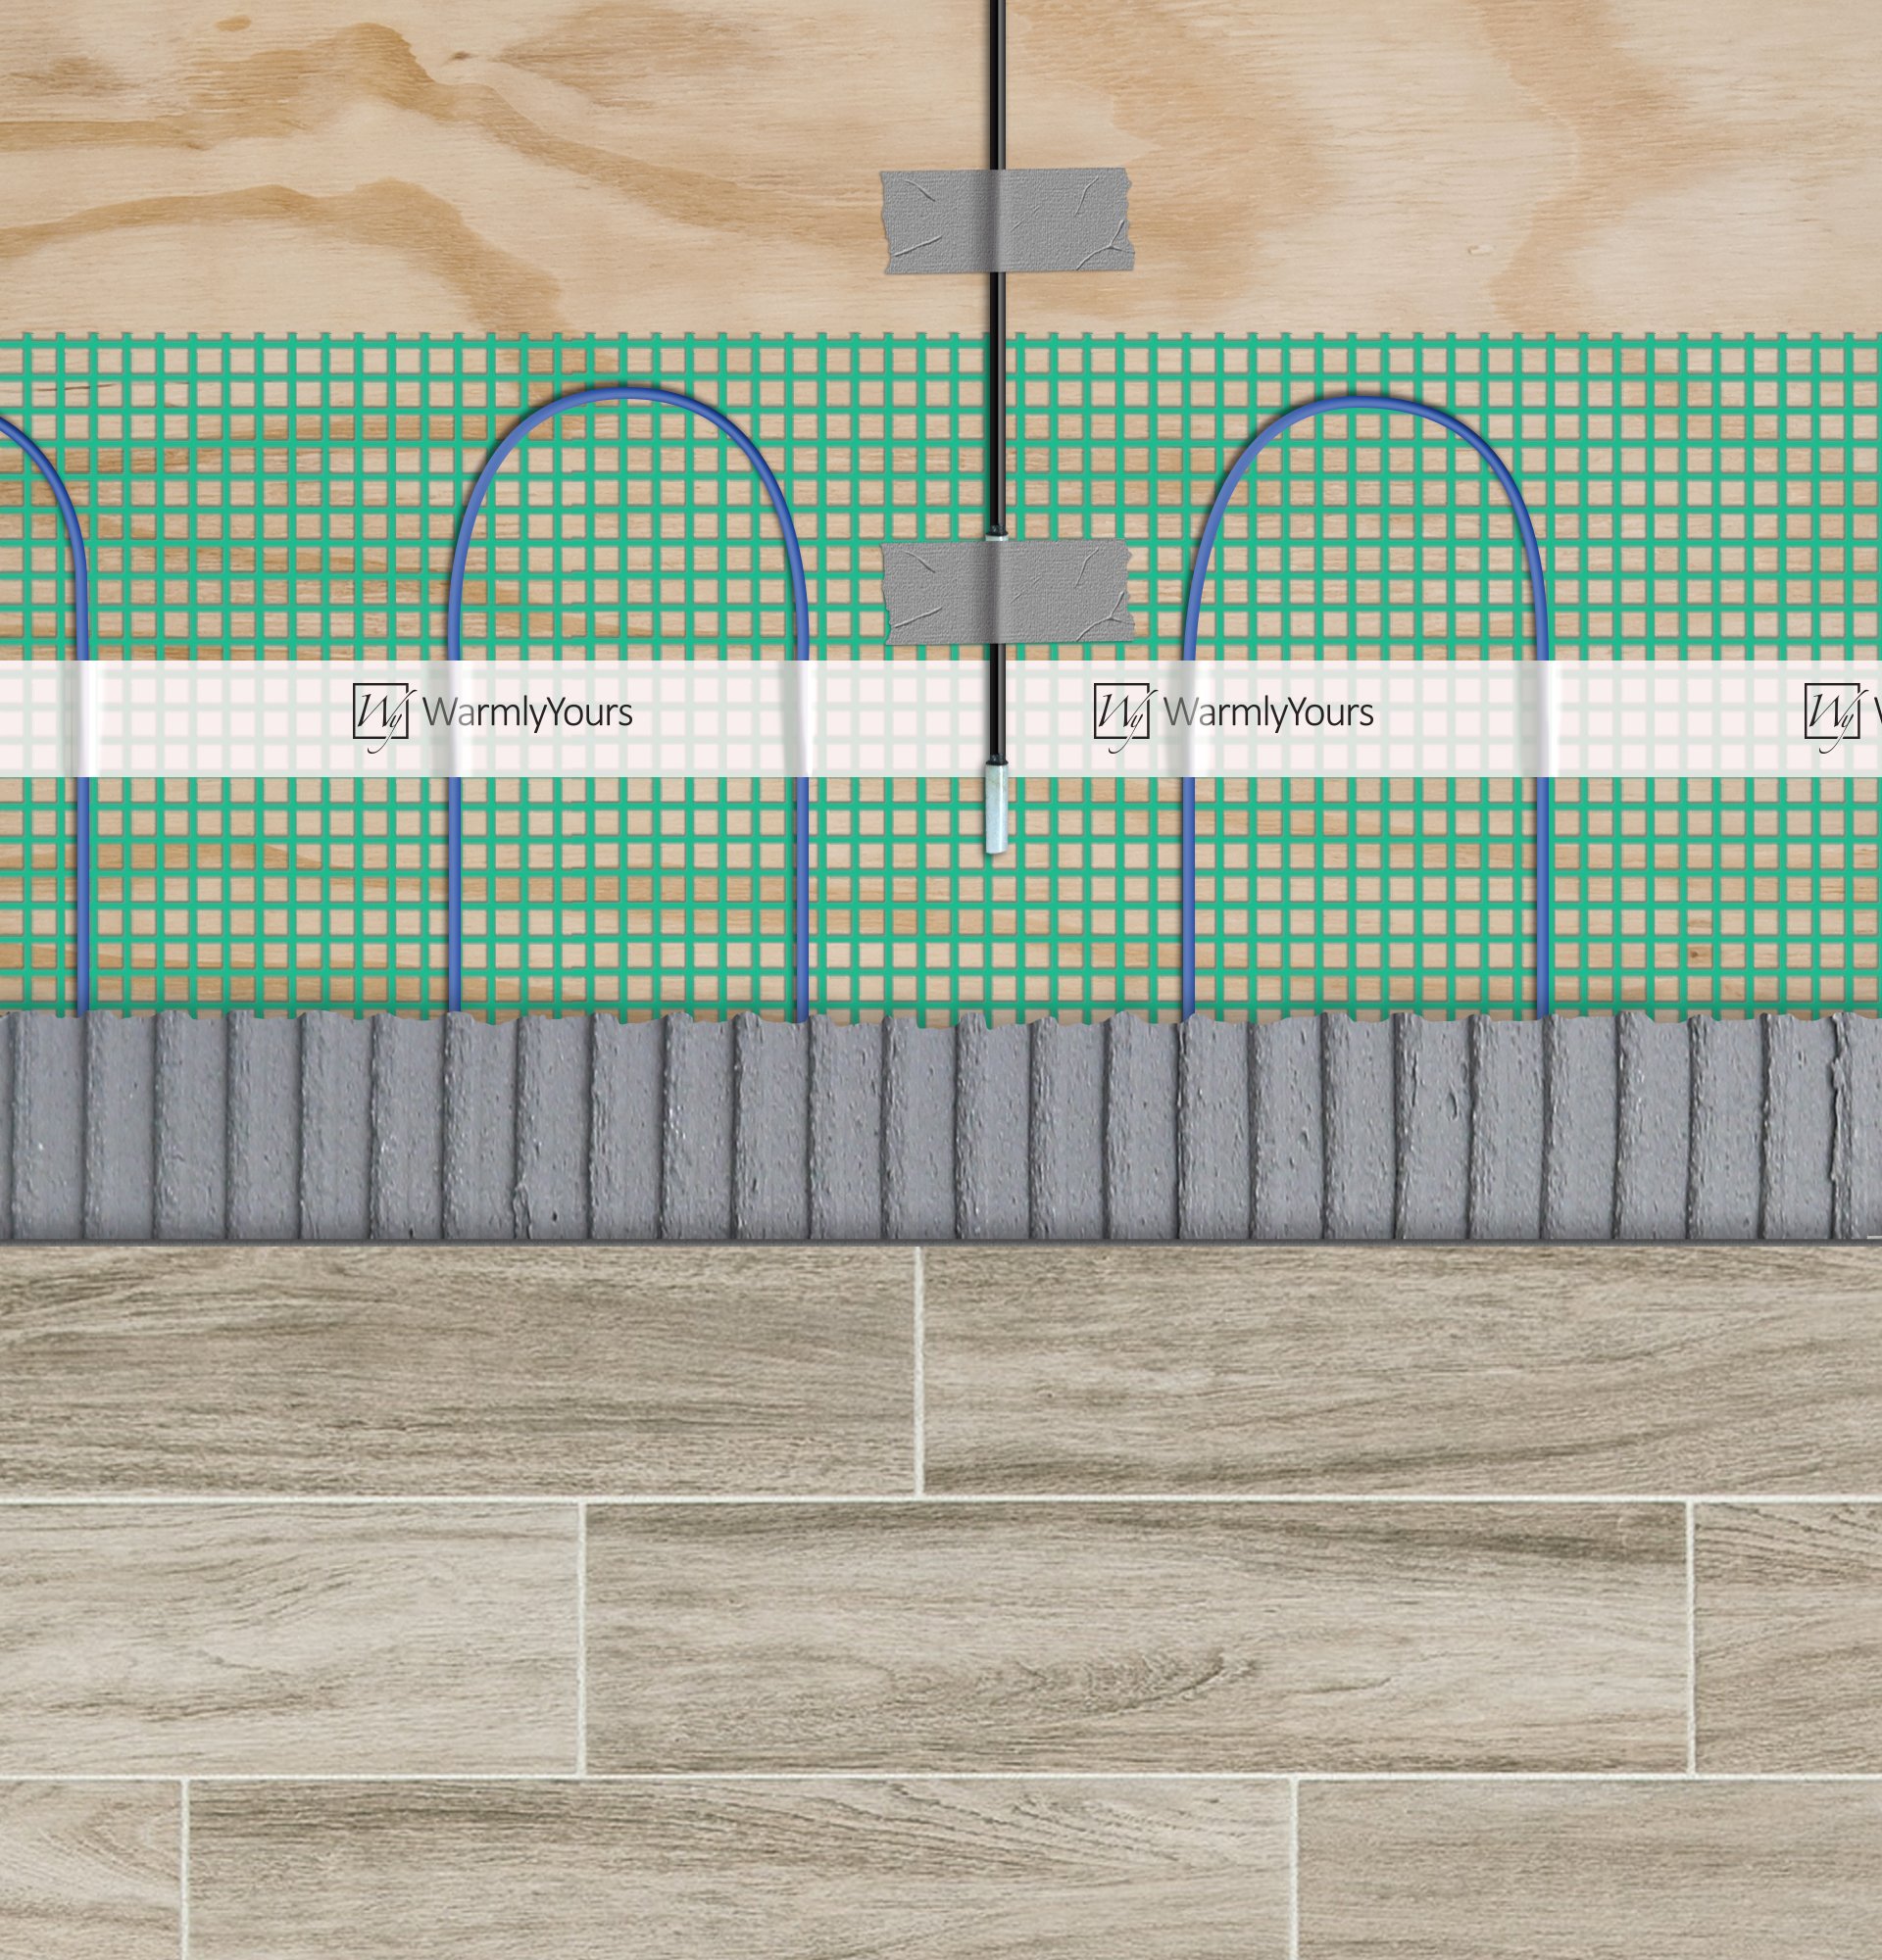 Cross-section of a tile floor: subfloor, electric heating roll, thinset, and tile flooring